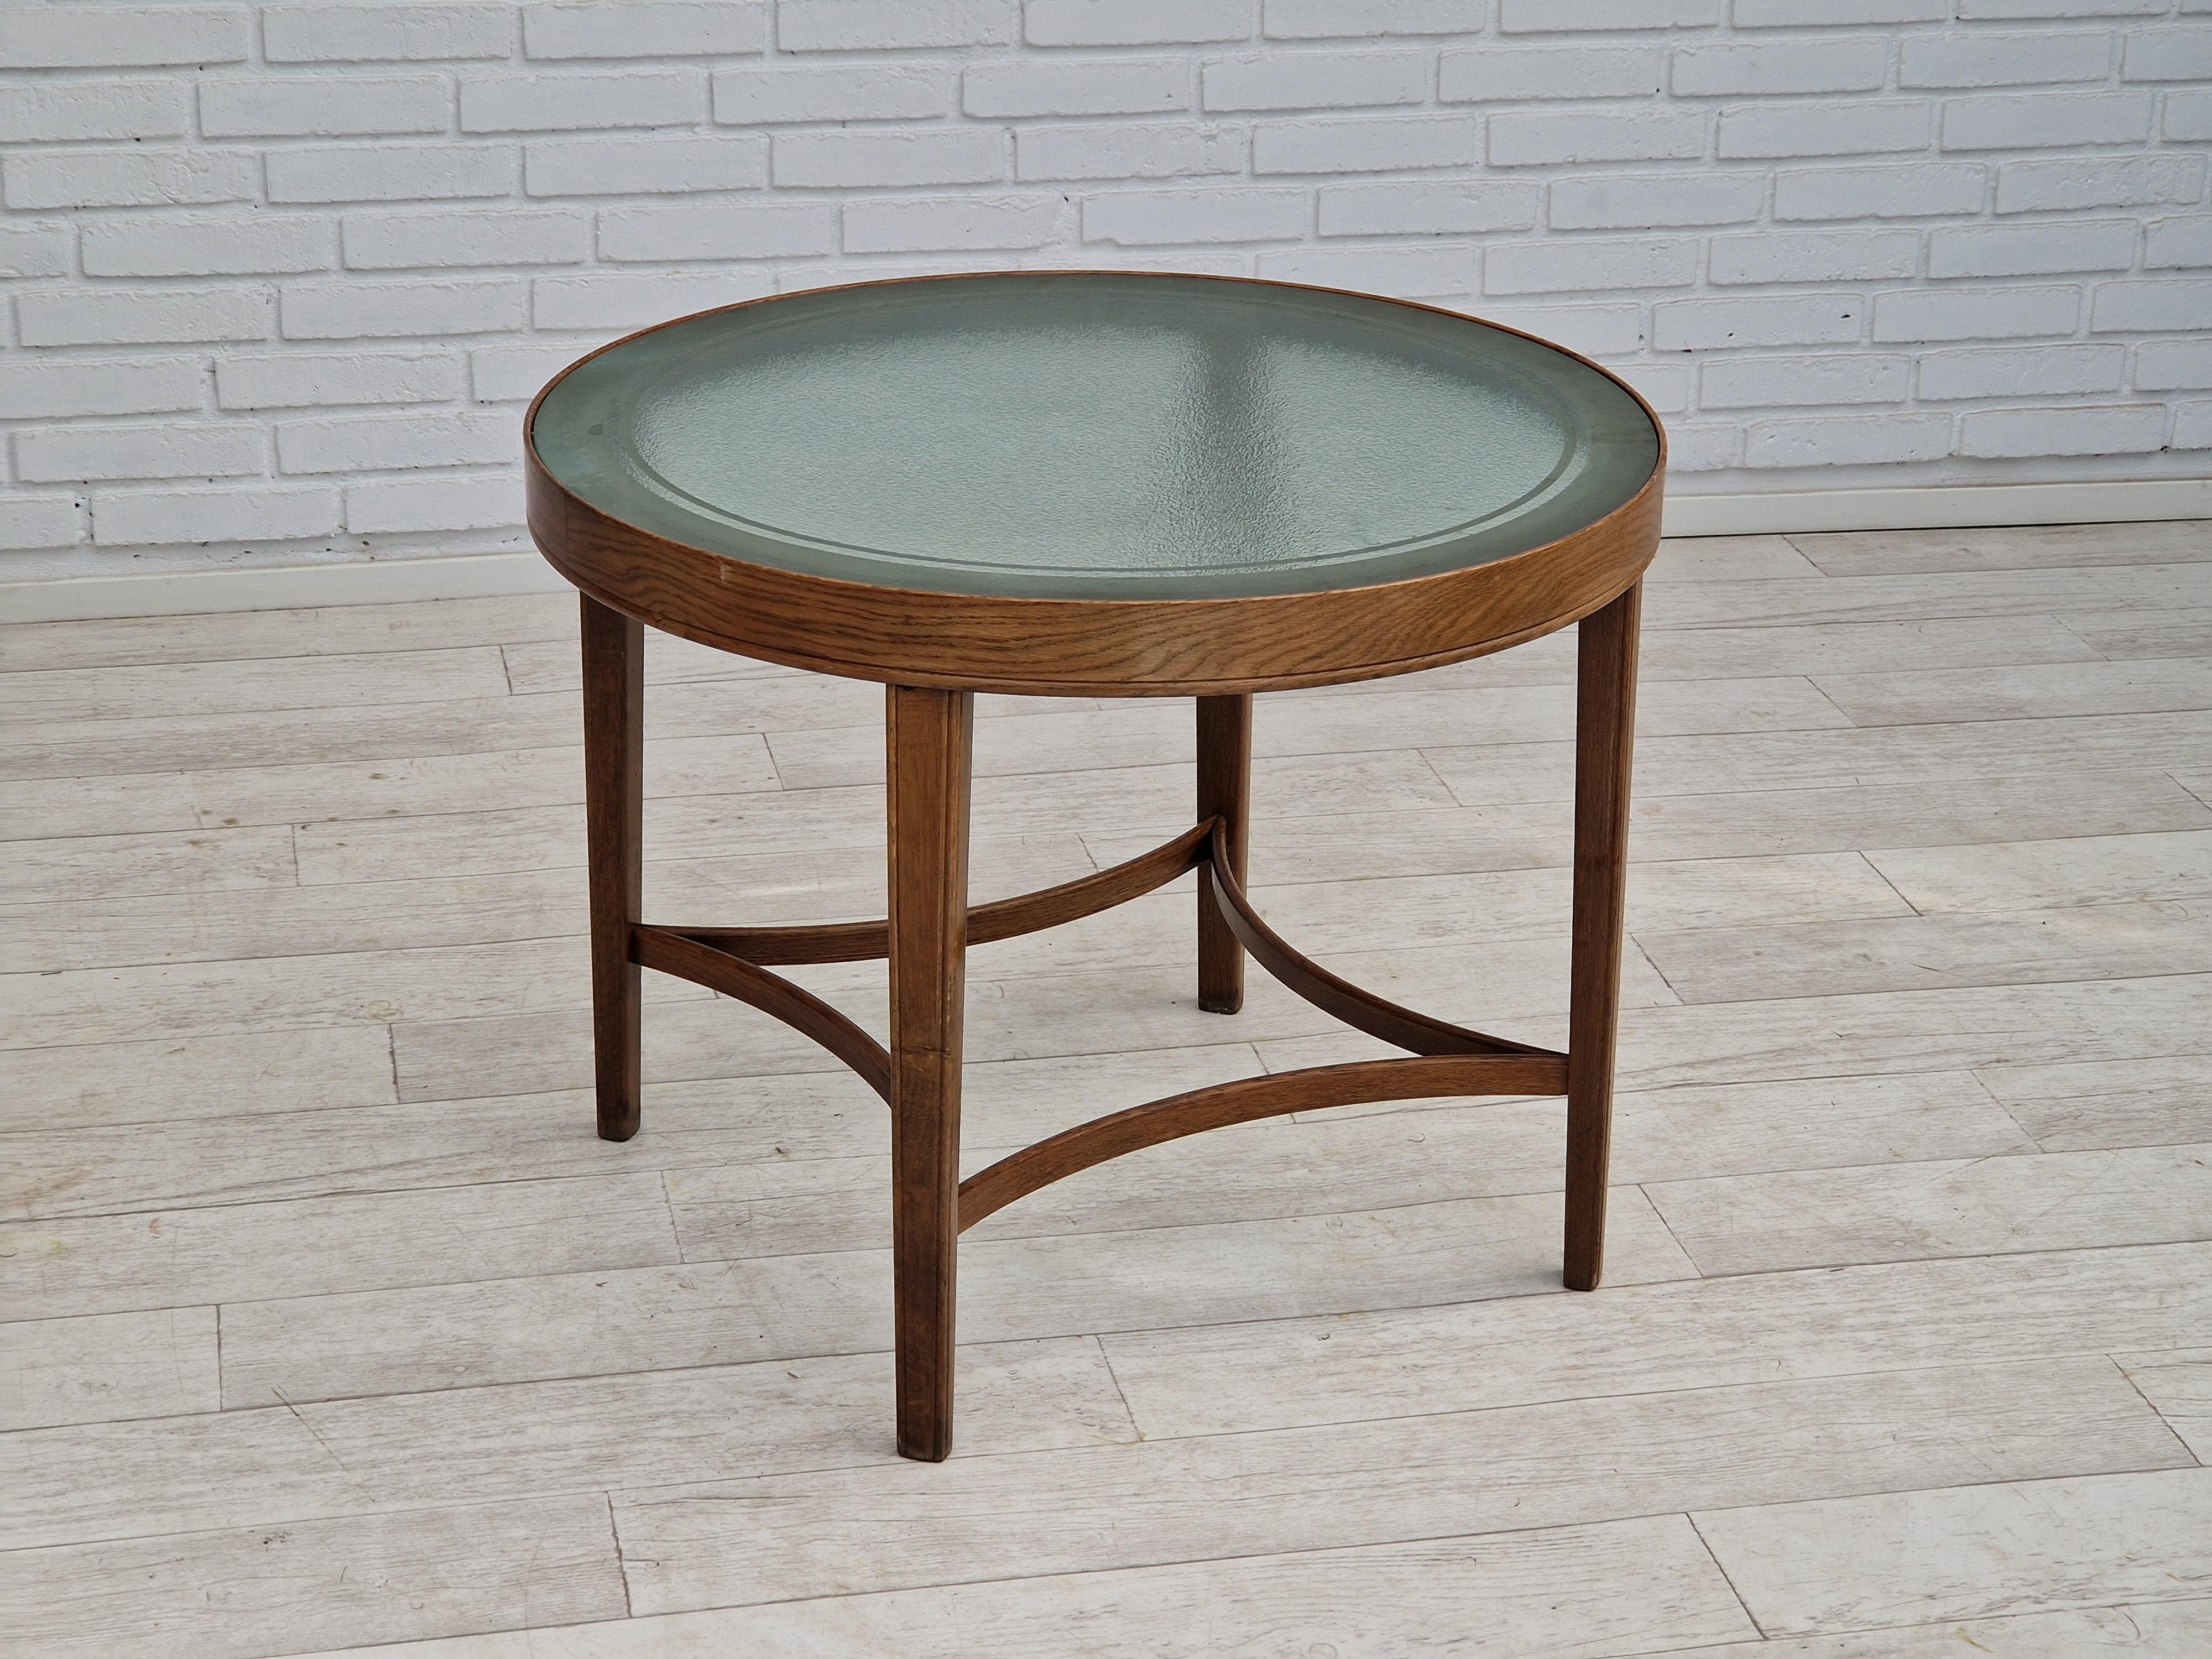 1950s, Danish design. Round coffee table. Glass top shaded edges. Oak wood, bent oak wood. Very good condition: no smells and no stains.
